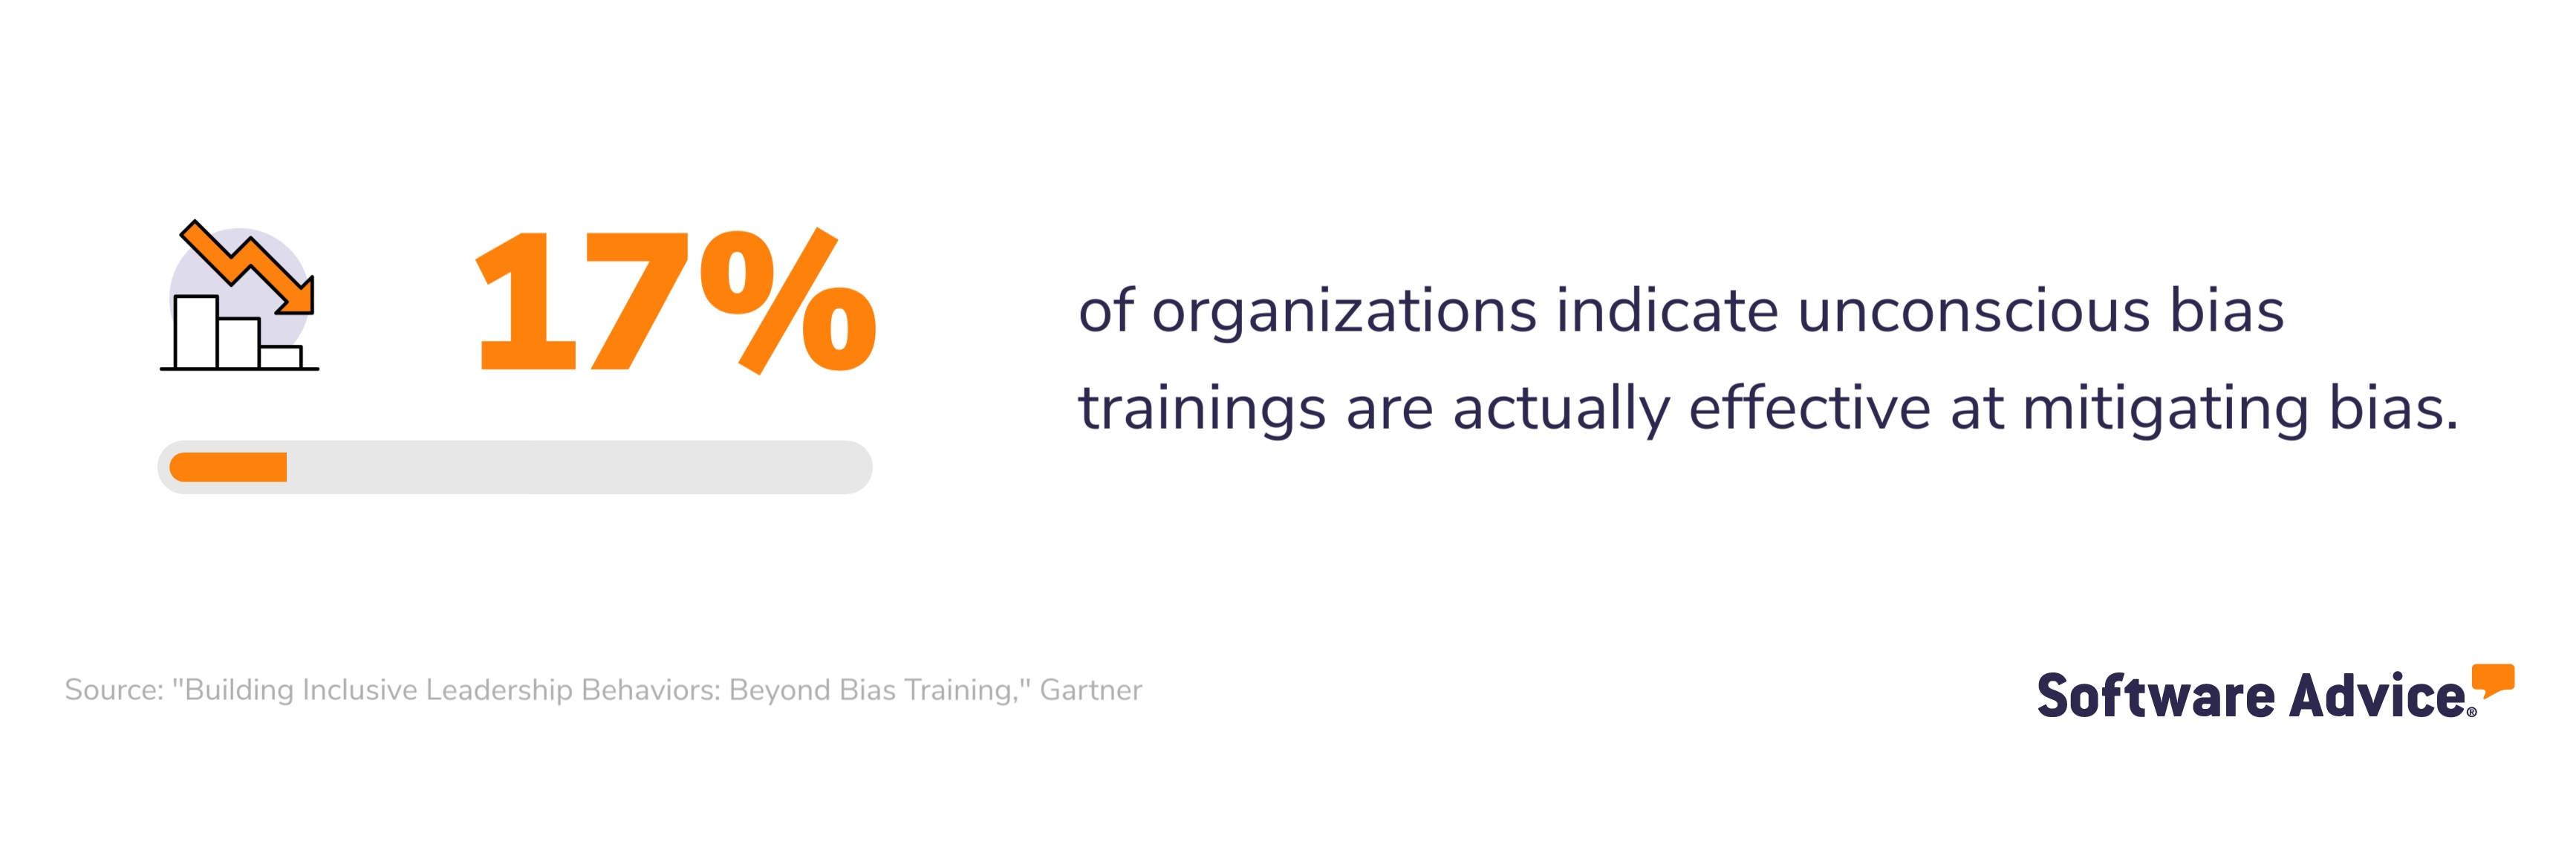 Only 17% of organizations indicate unconscious bias trainings are effective at mitigating biases.